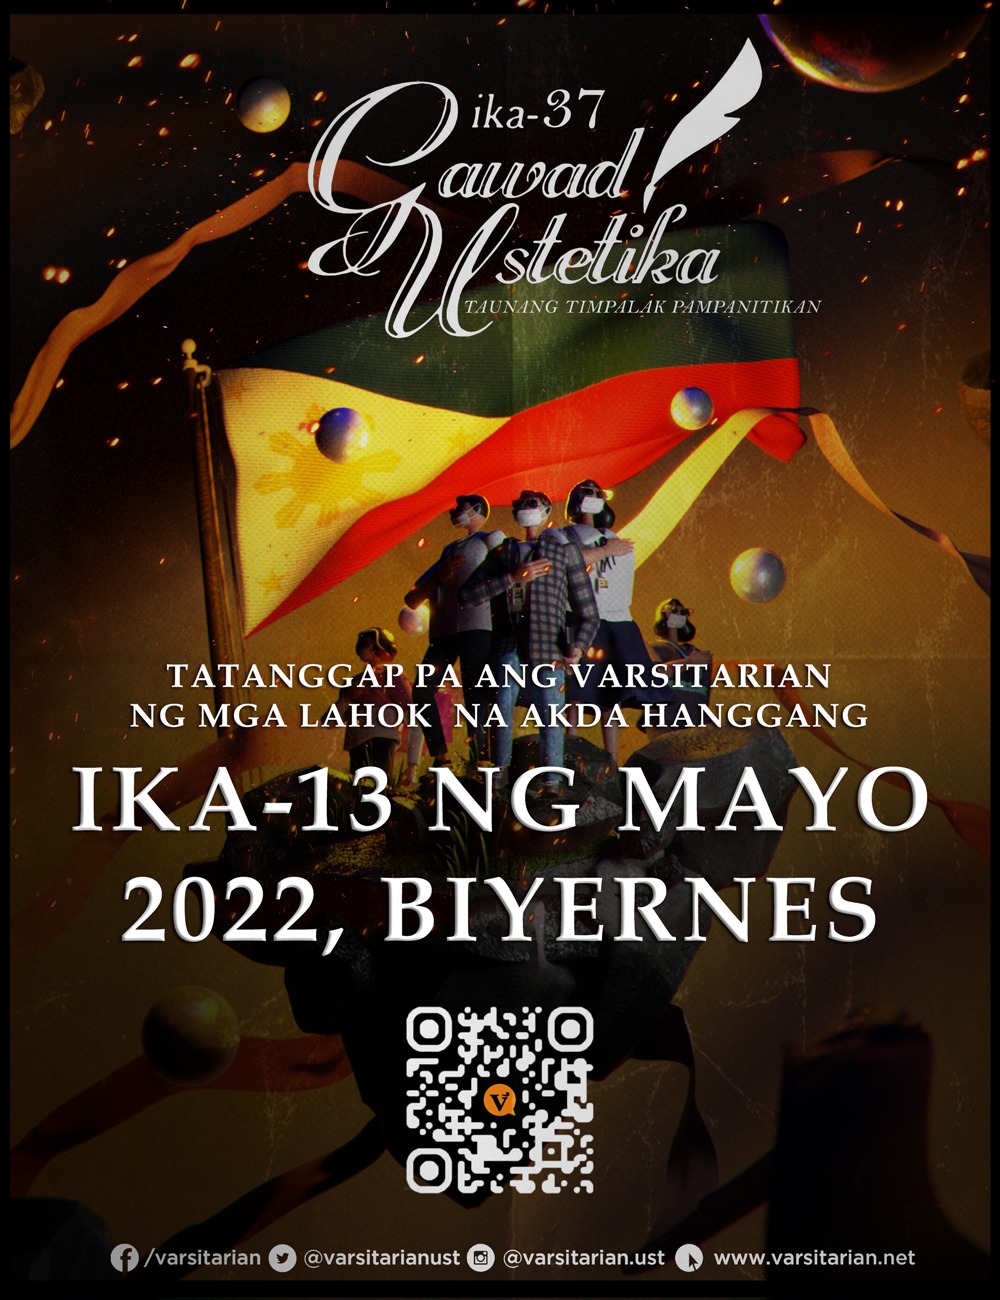 The Varsitarian’s 37th Gawad Ustetika submission deadline extended to May 13